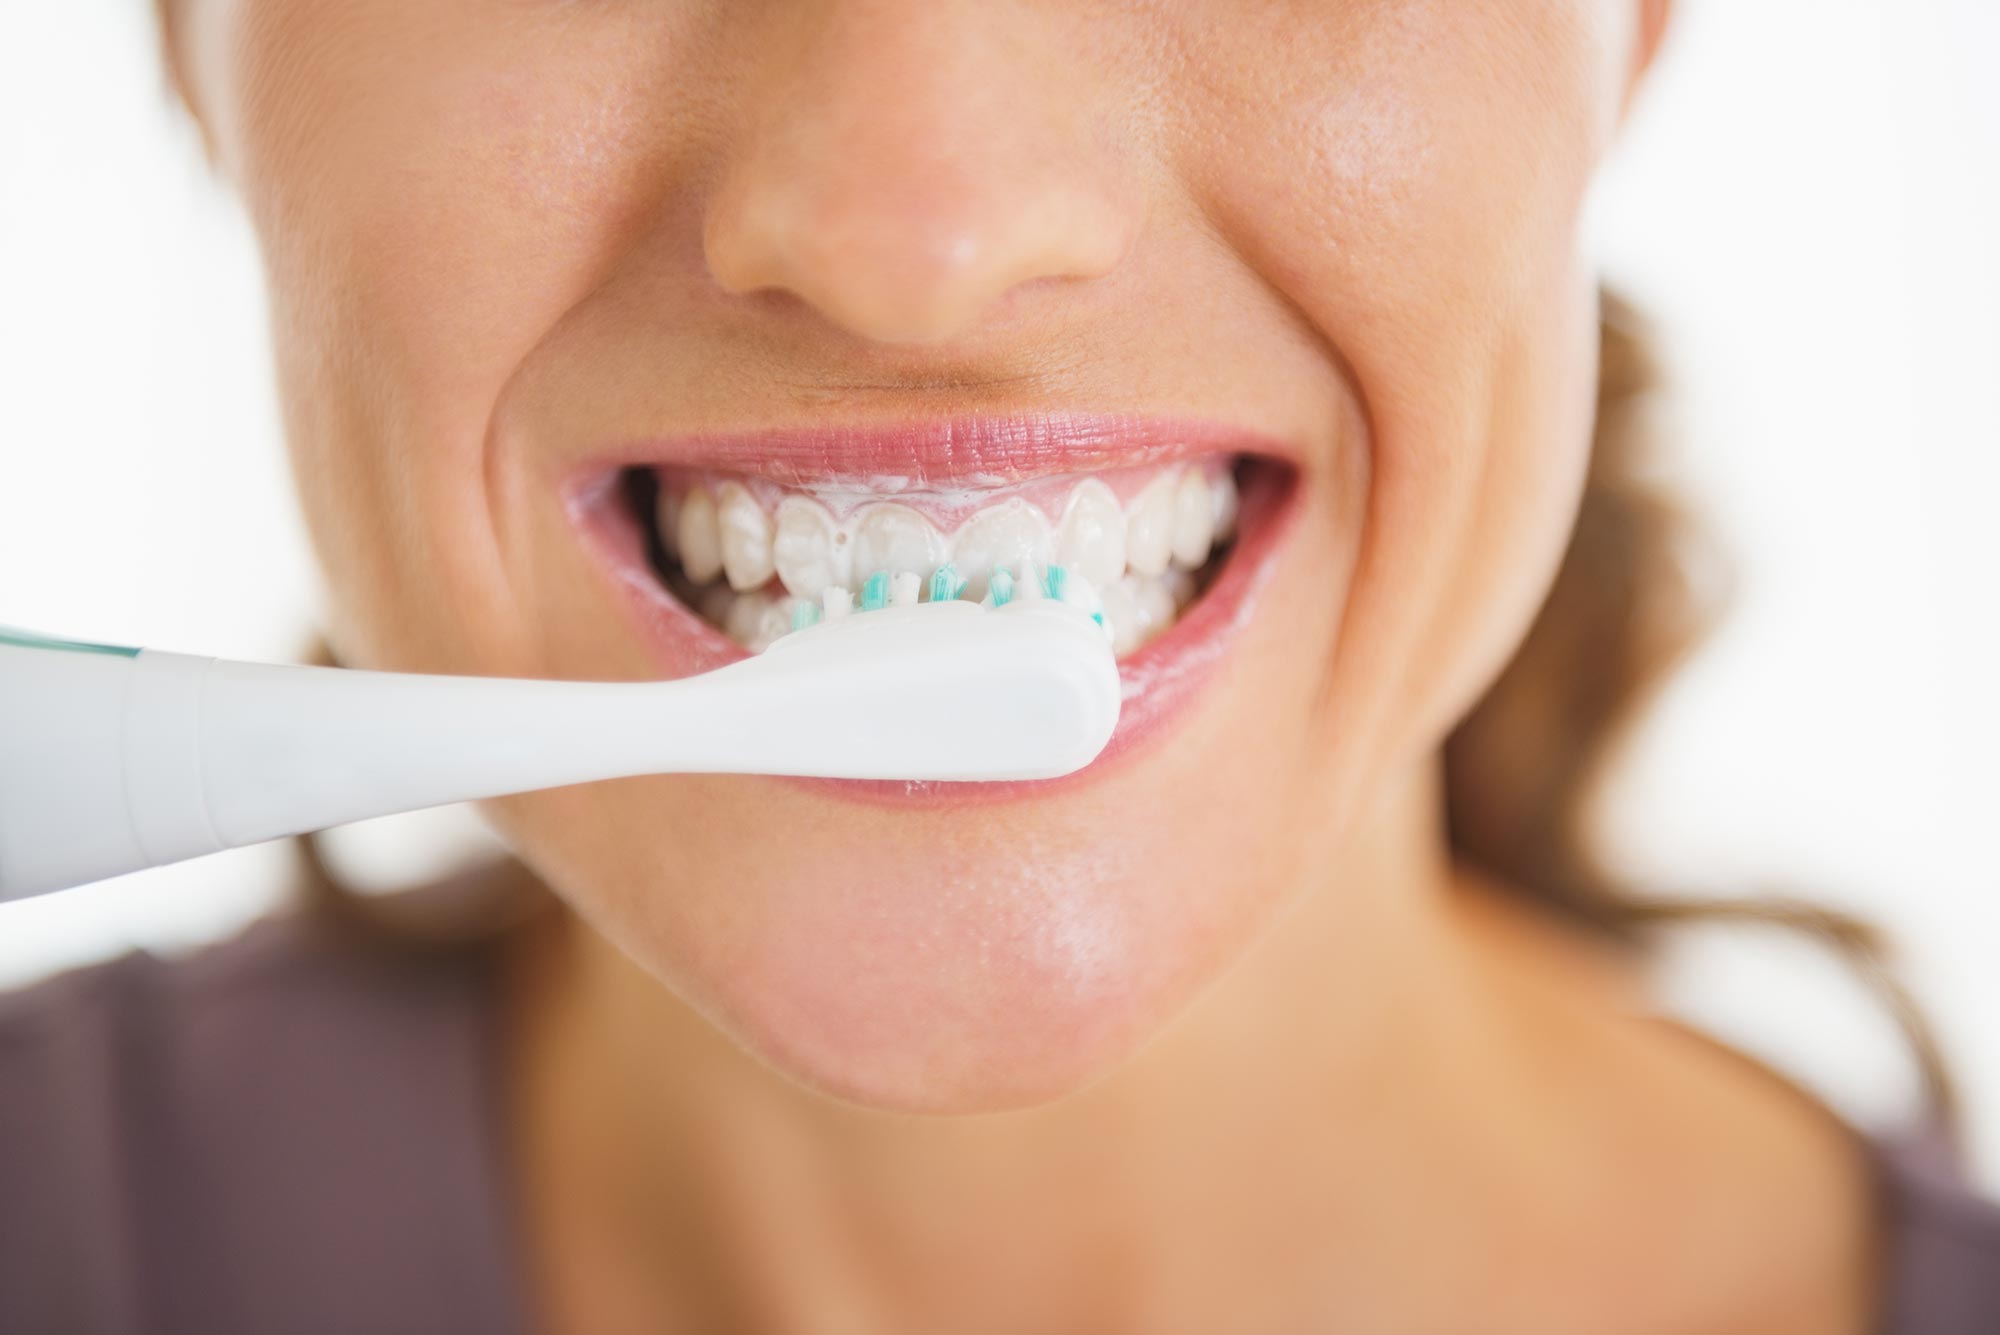 A study found brushing your teeth three times a day links to a lower risk of diabetes